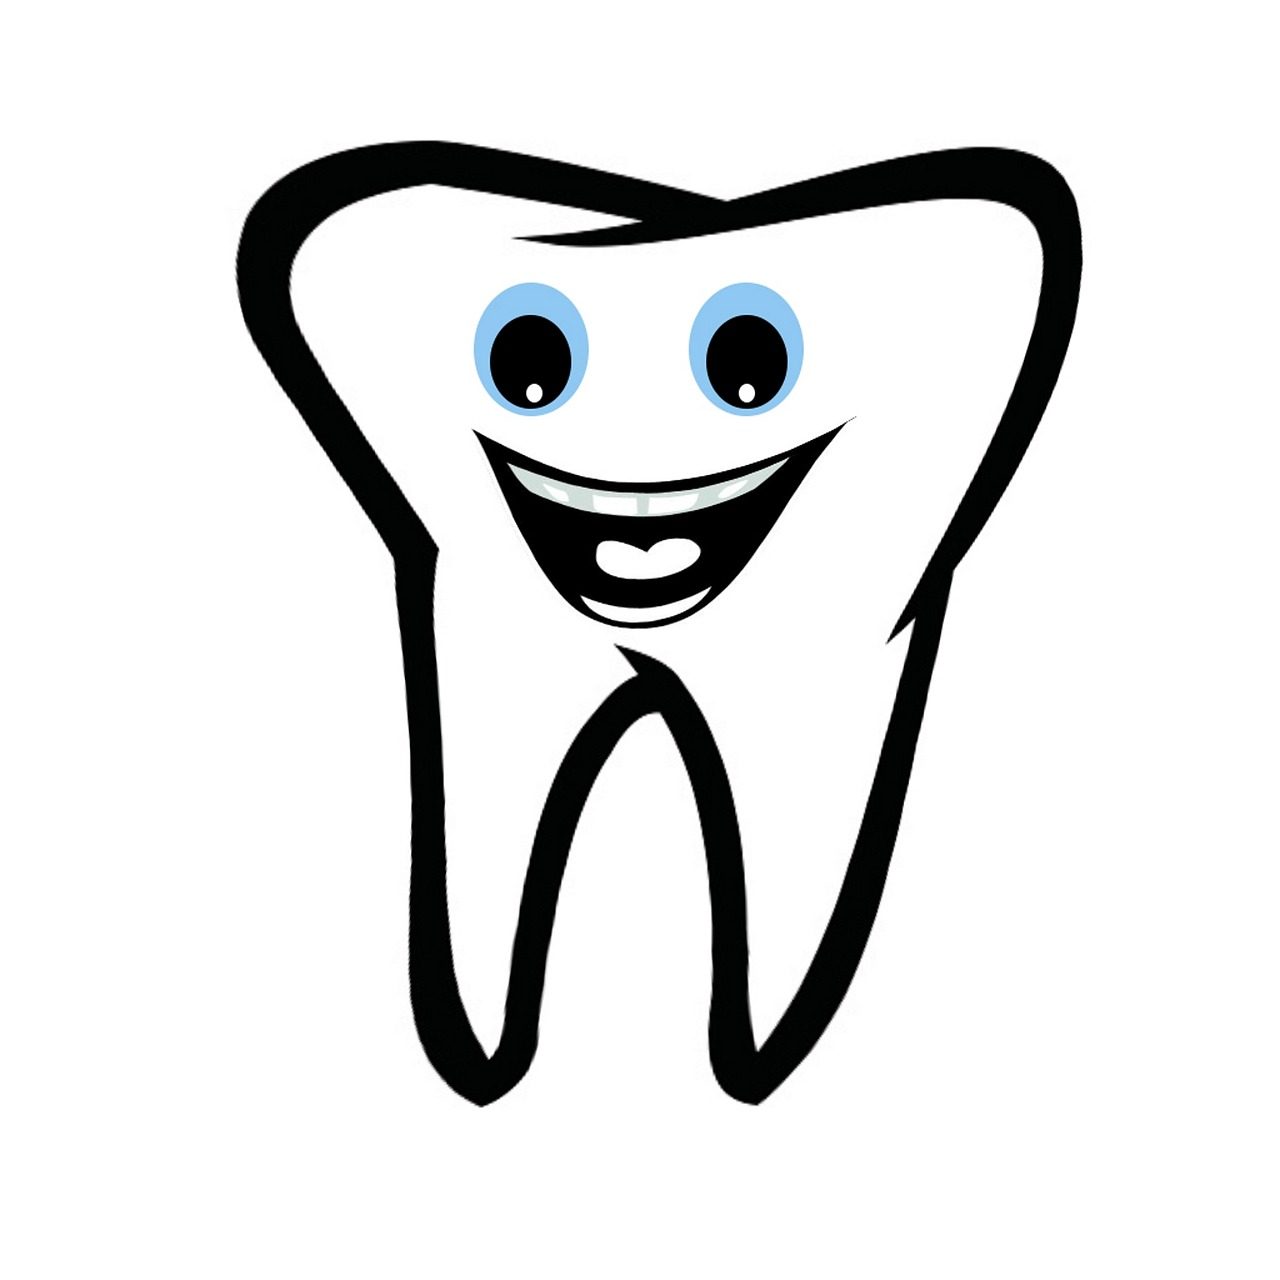 tooth-2340270_1280